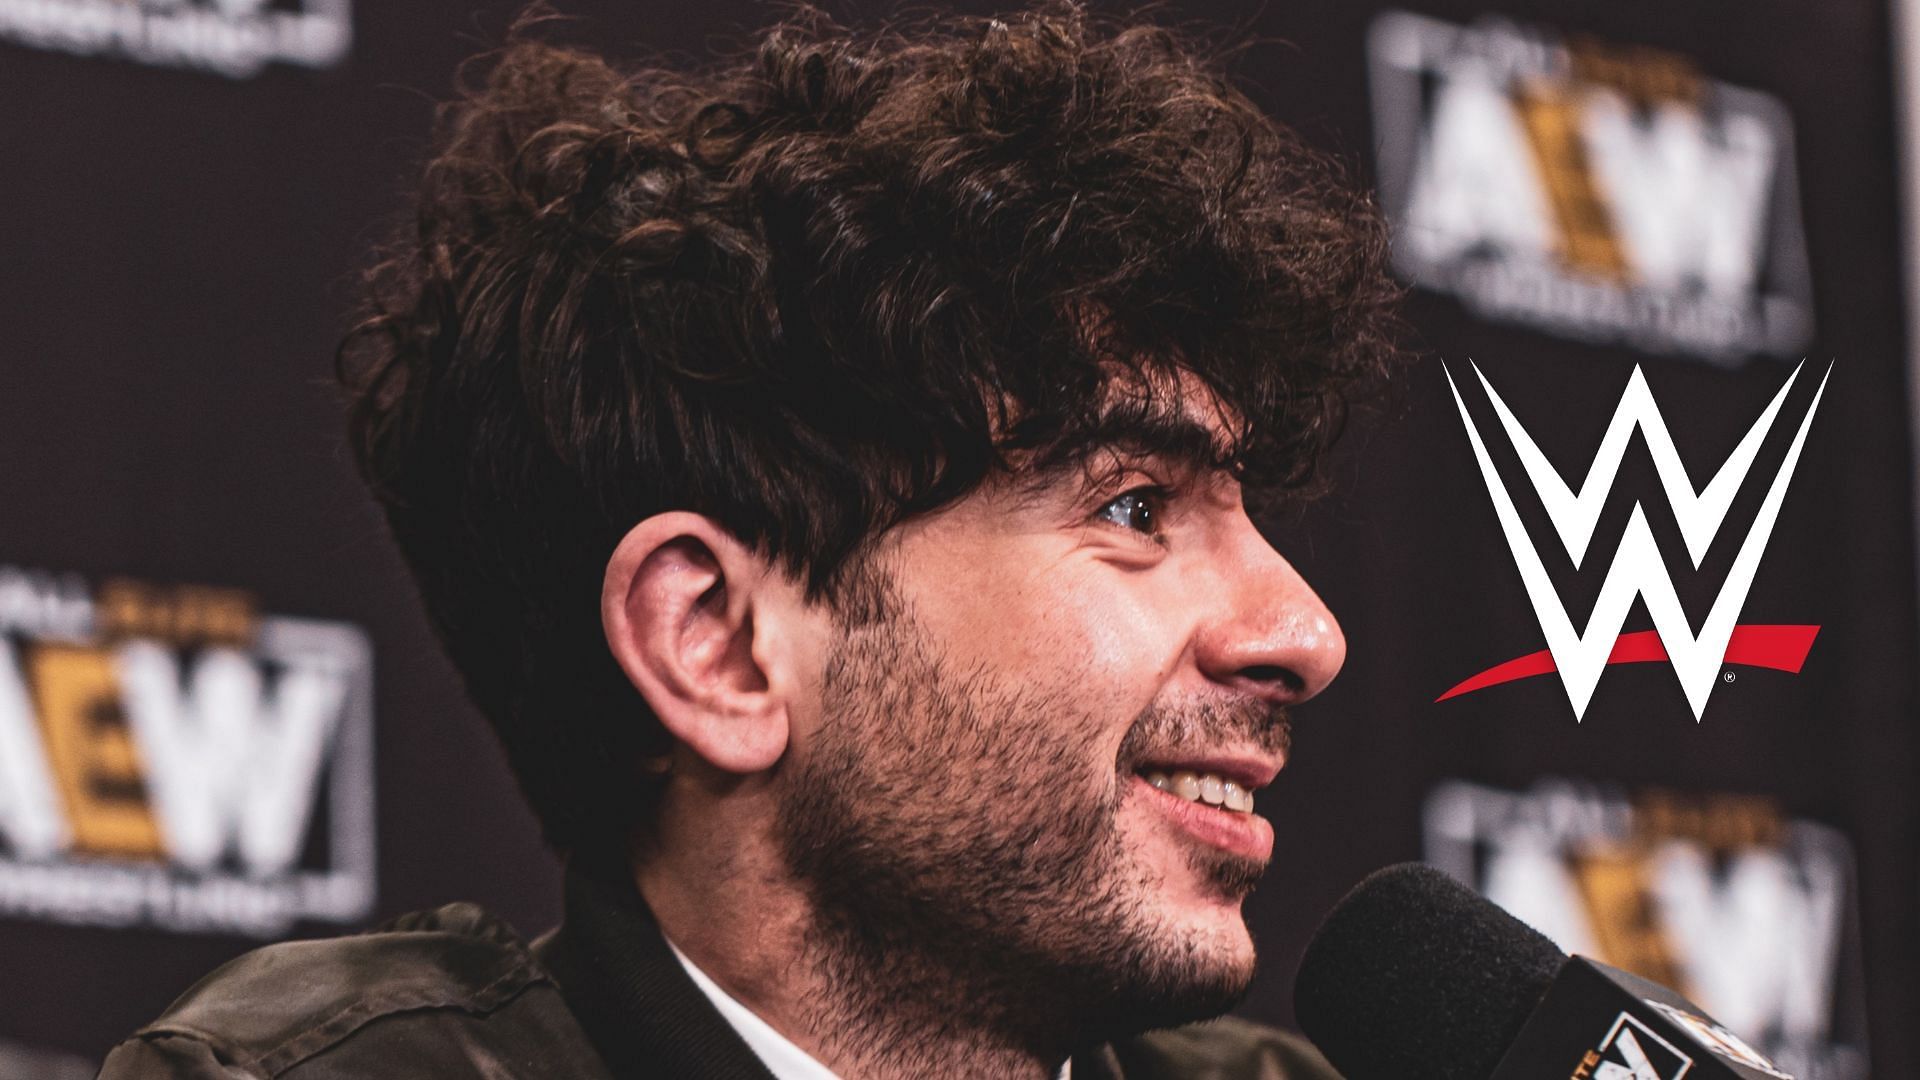 Tony Khan has acknowledged the impact a former WWE Champion has had in AEW